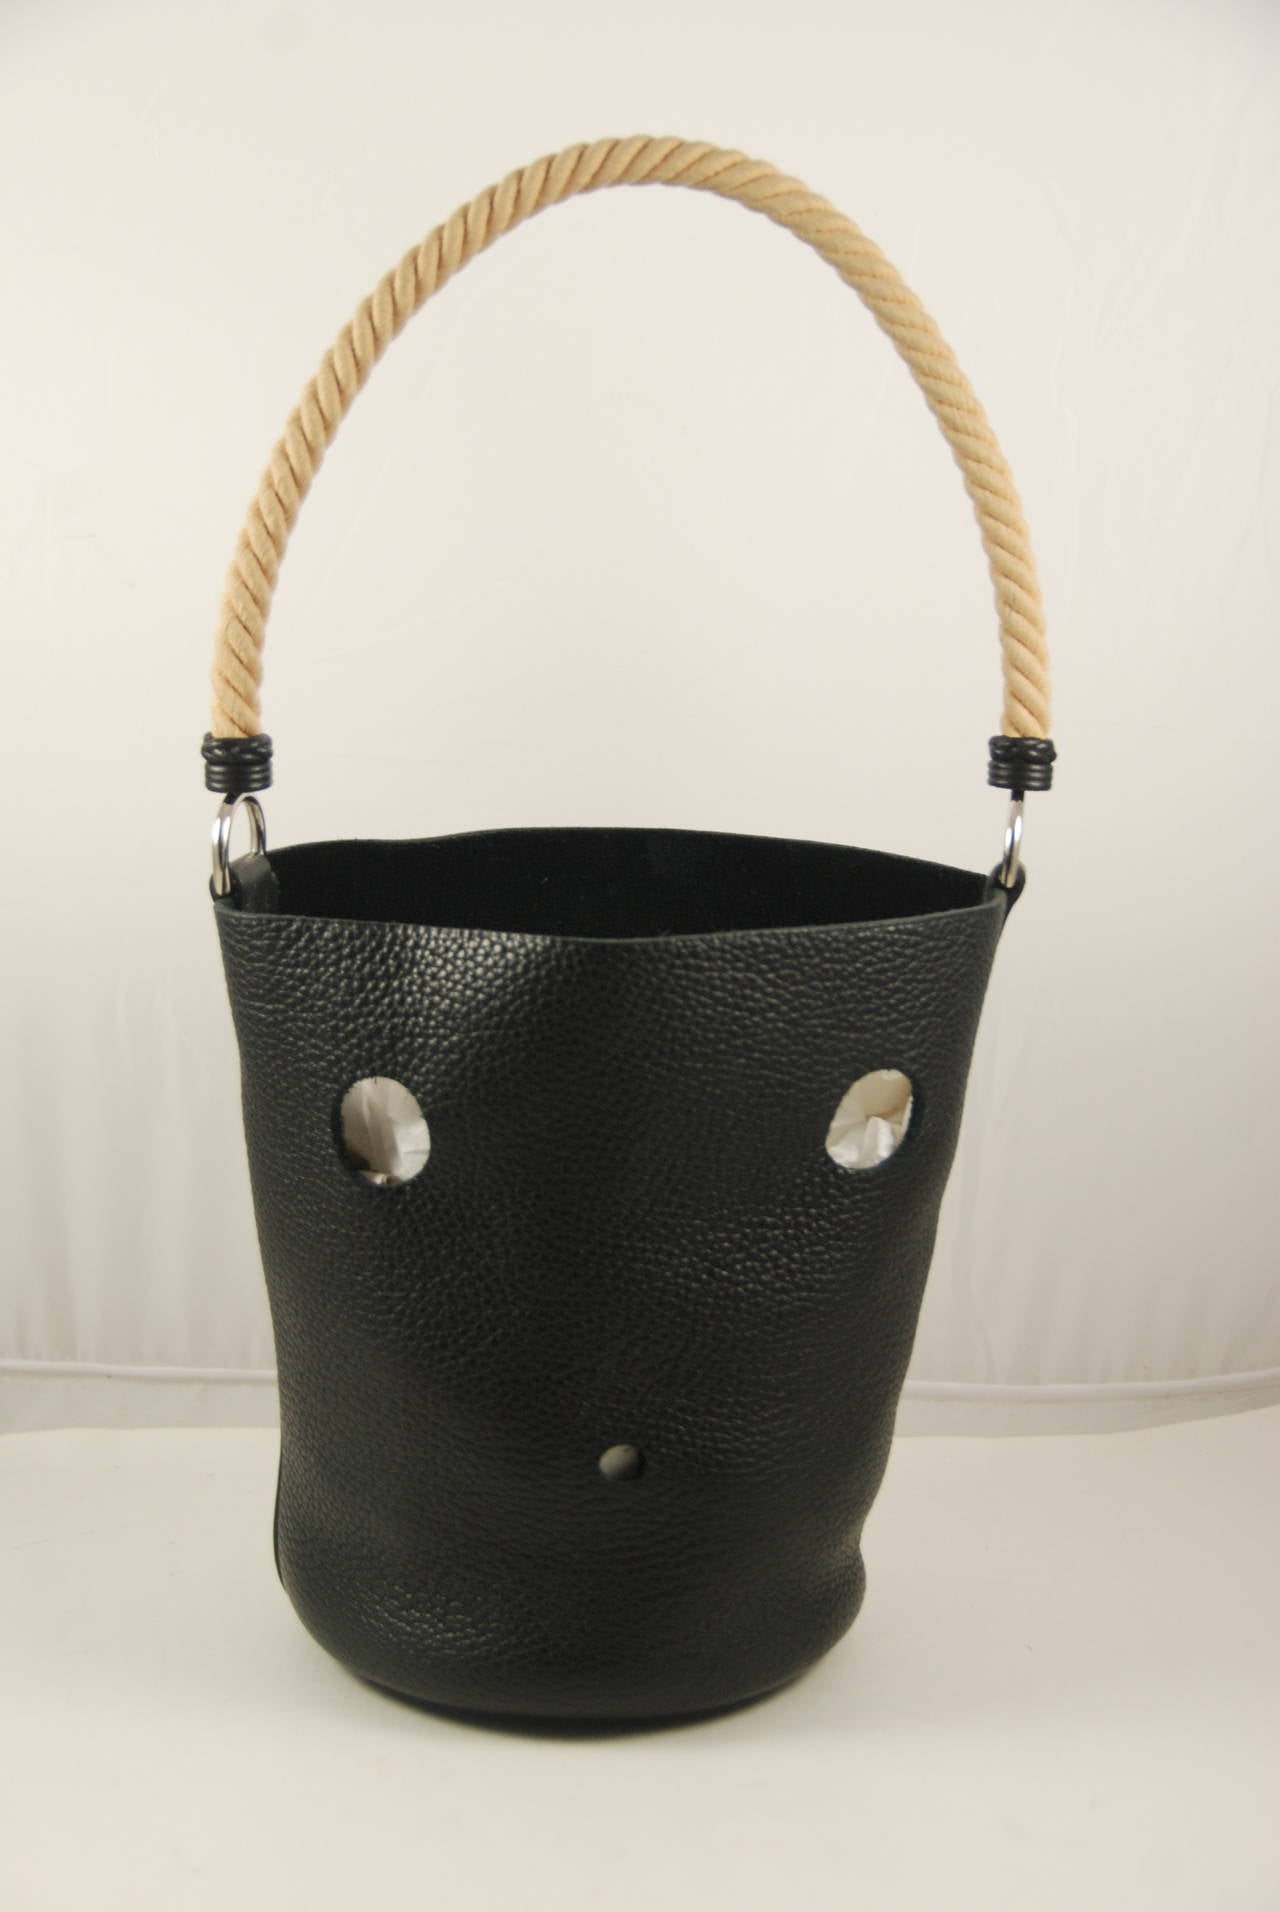 Hermes black clemence leather Mangeroire bucket bag from 2005. The handle is twisted rope and long enough to be tucked under your shoulder or used as a handbag. The strap has a 9